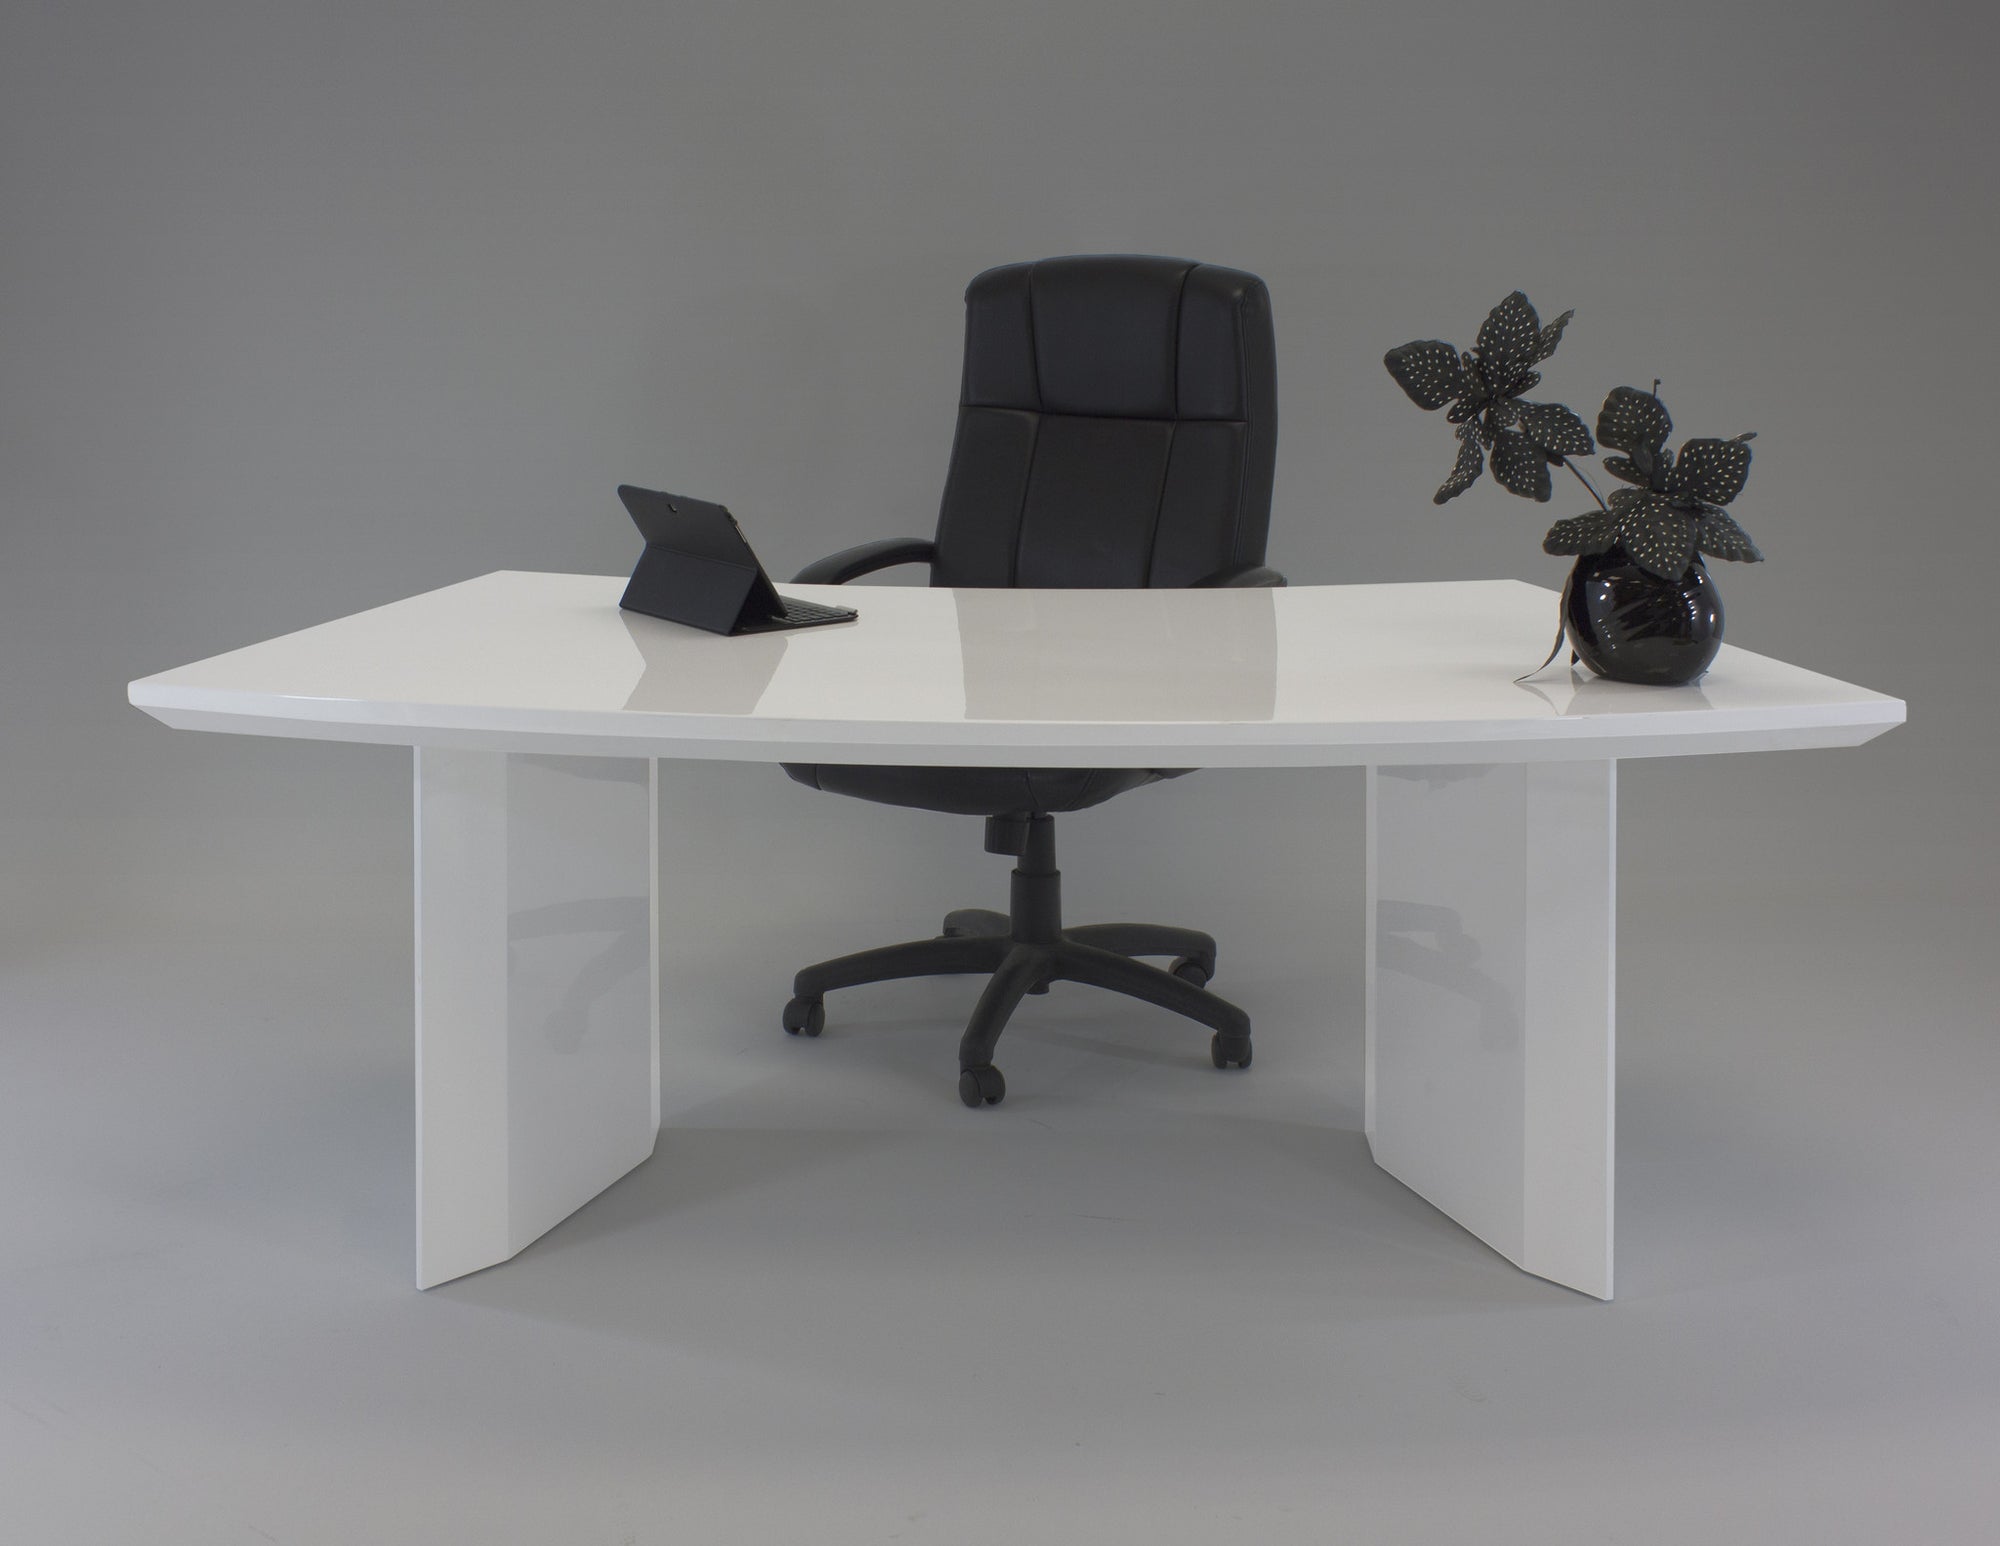 80 5 White Executive Desk With Curve By Sharelle Officedesk Com